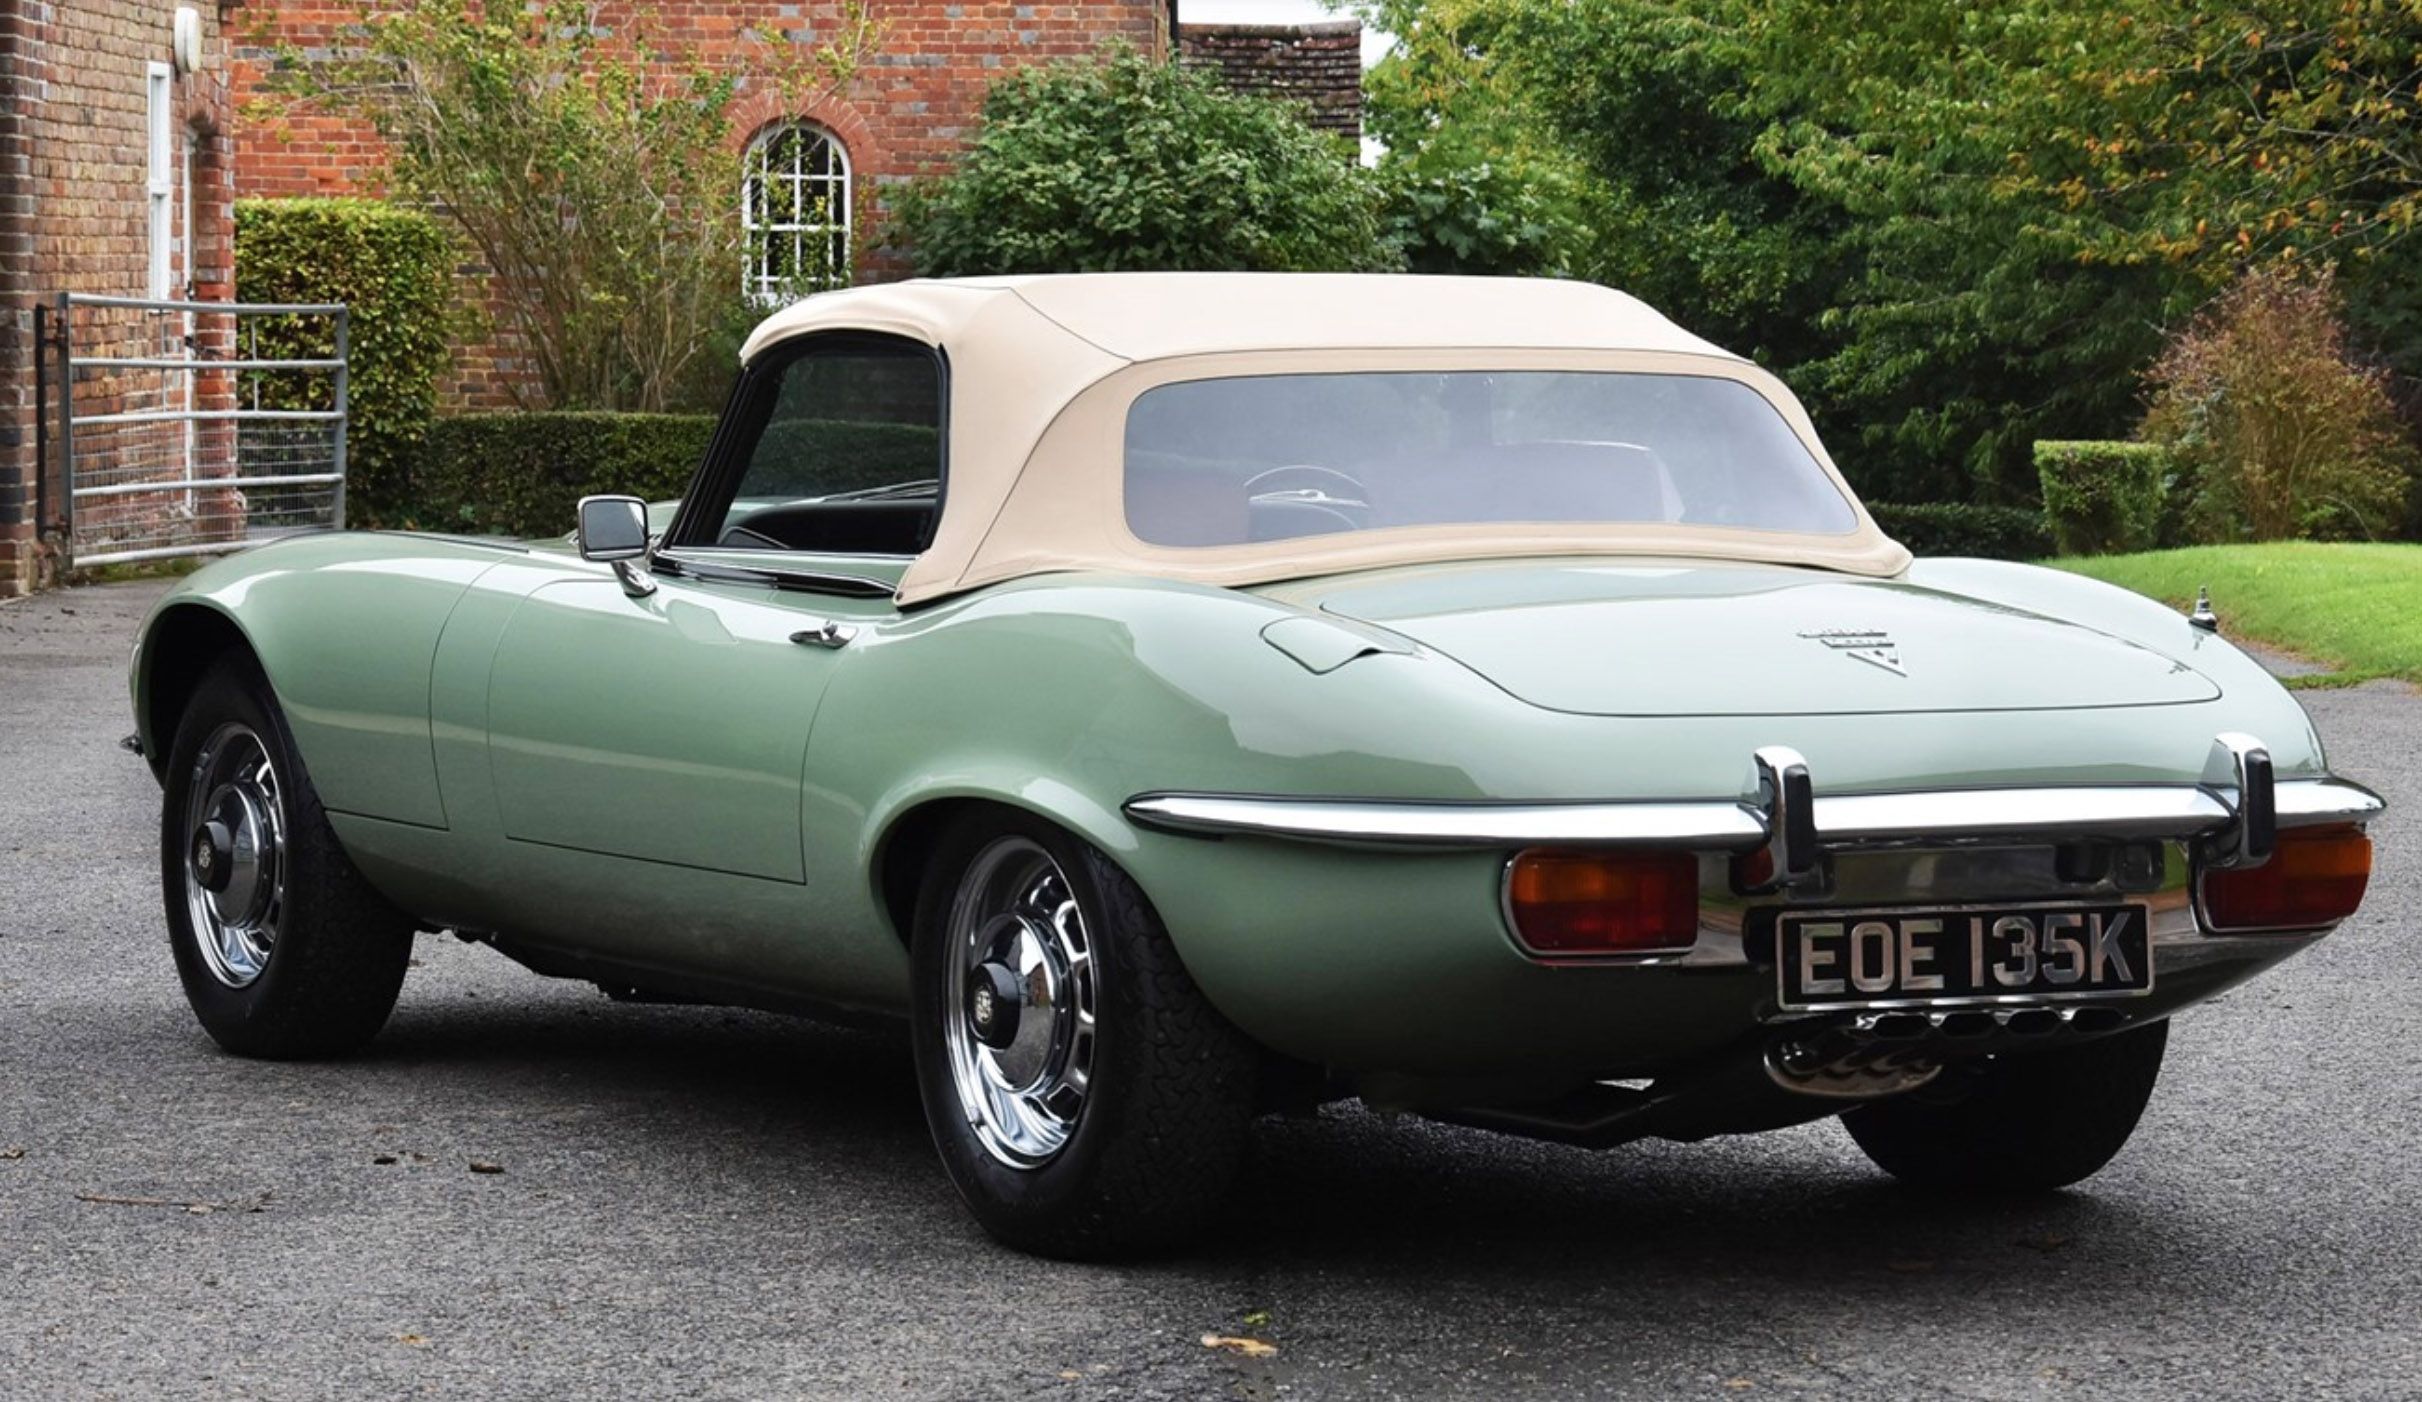 Jaguar E-Type formerly owned by Kevin Keegan has been restored